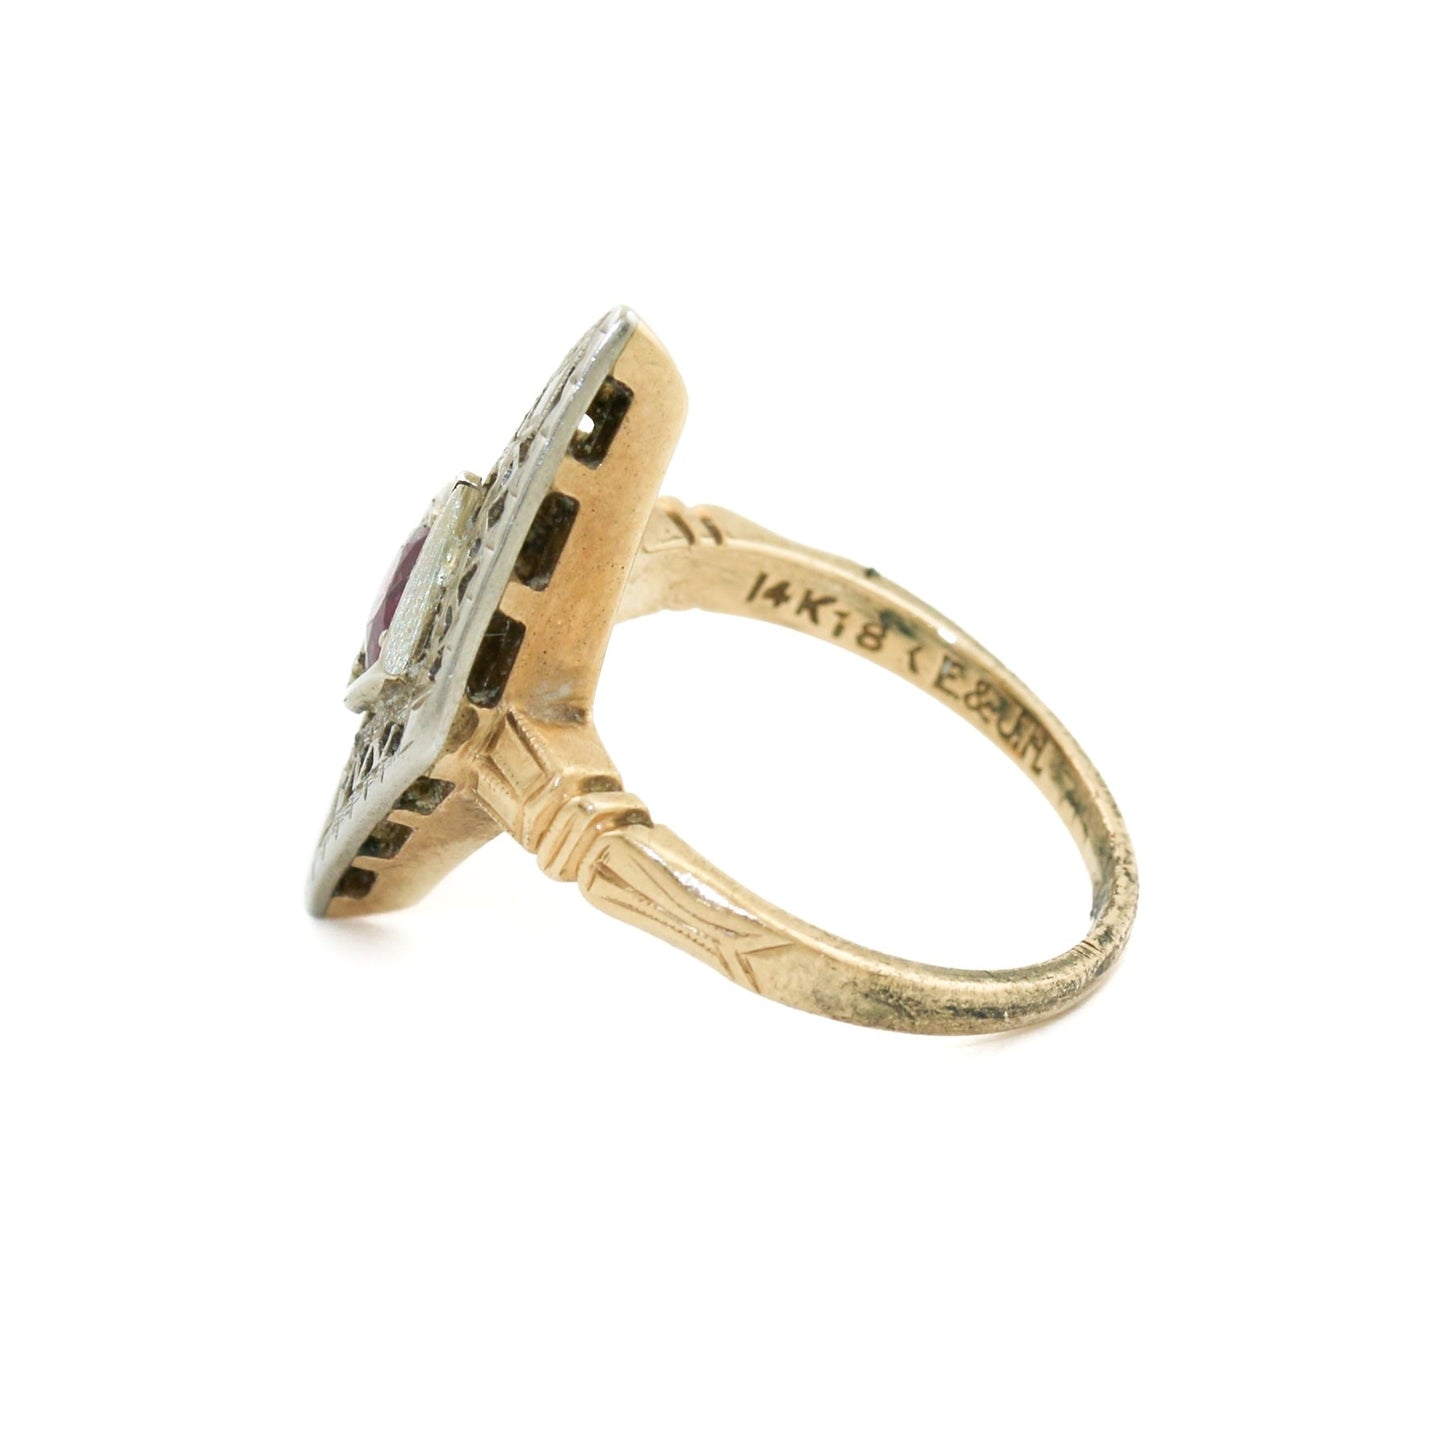 Antique Two-Toned Ruby 14k Gold Ring 4.5 - Kingdom Jewelry